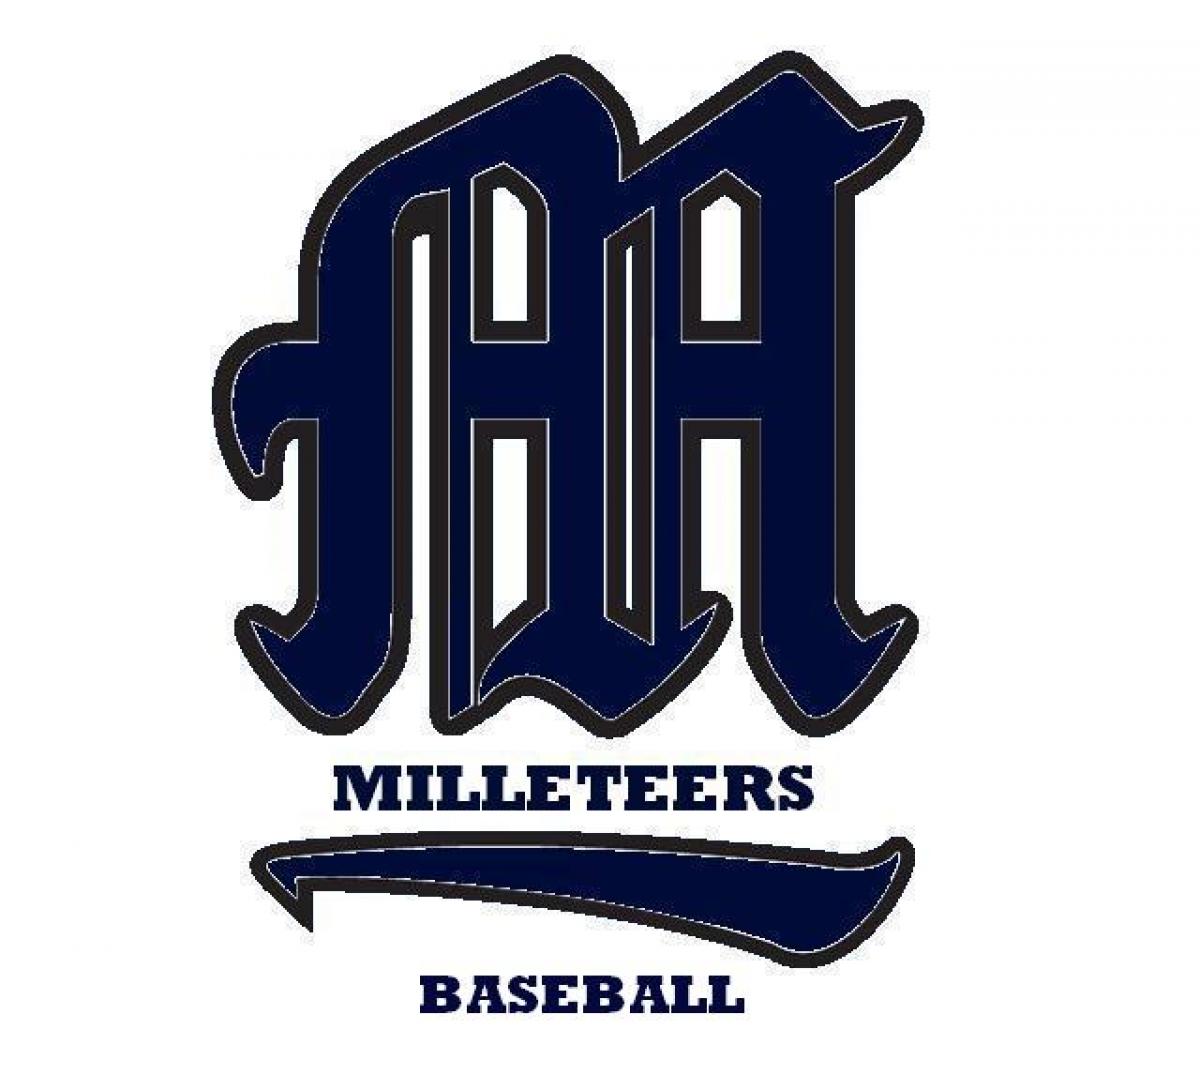 Roadrunners Comeback To Capitalize On Milleteers Collapse